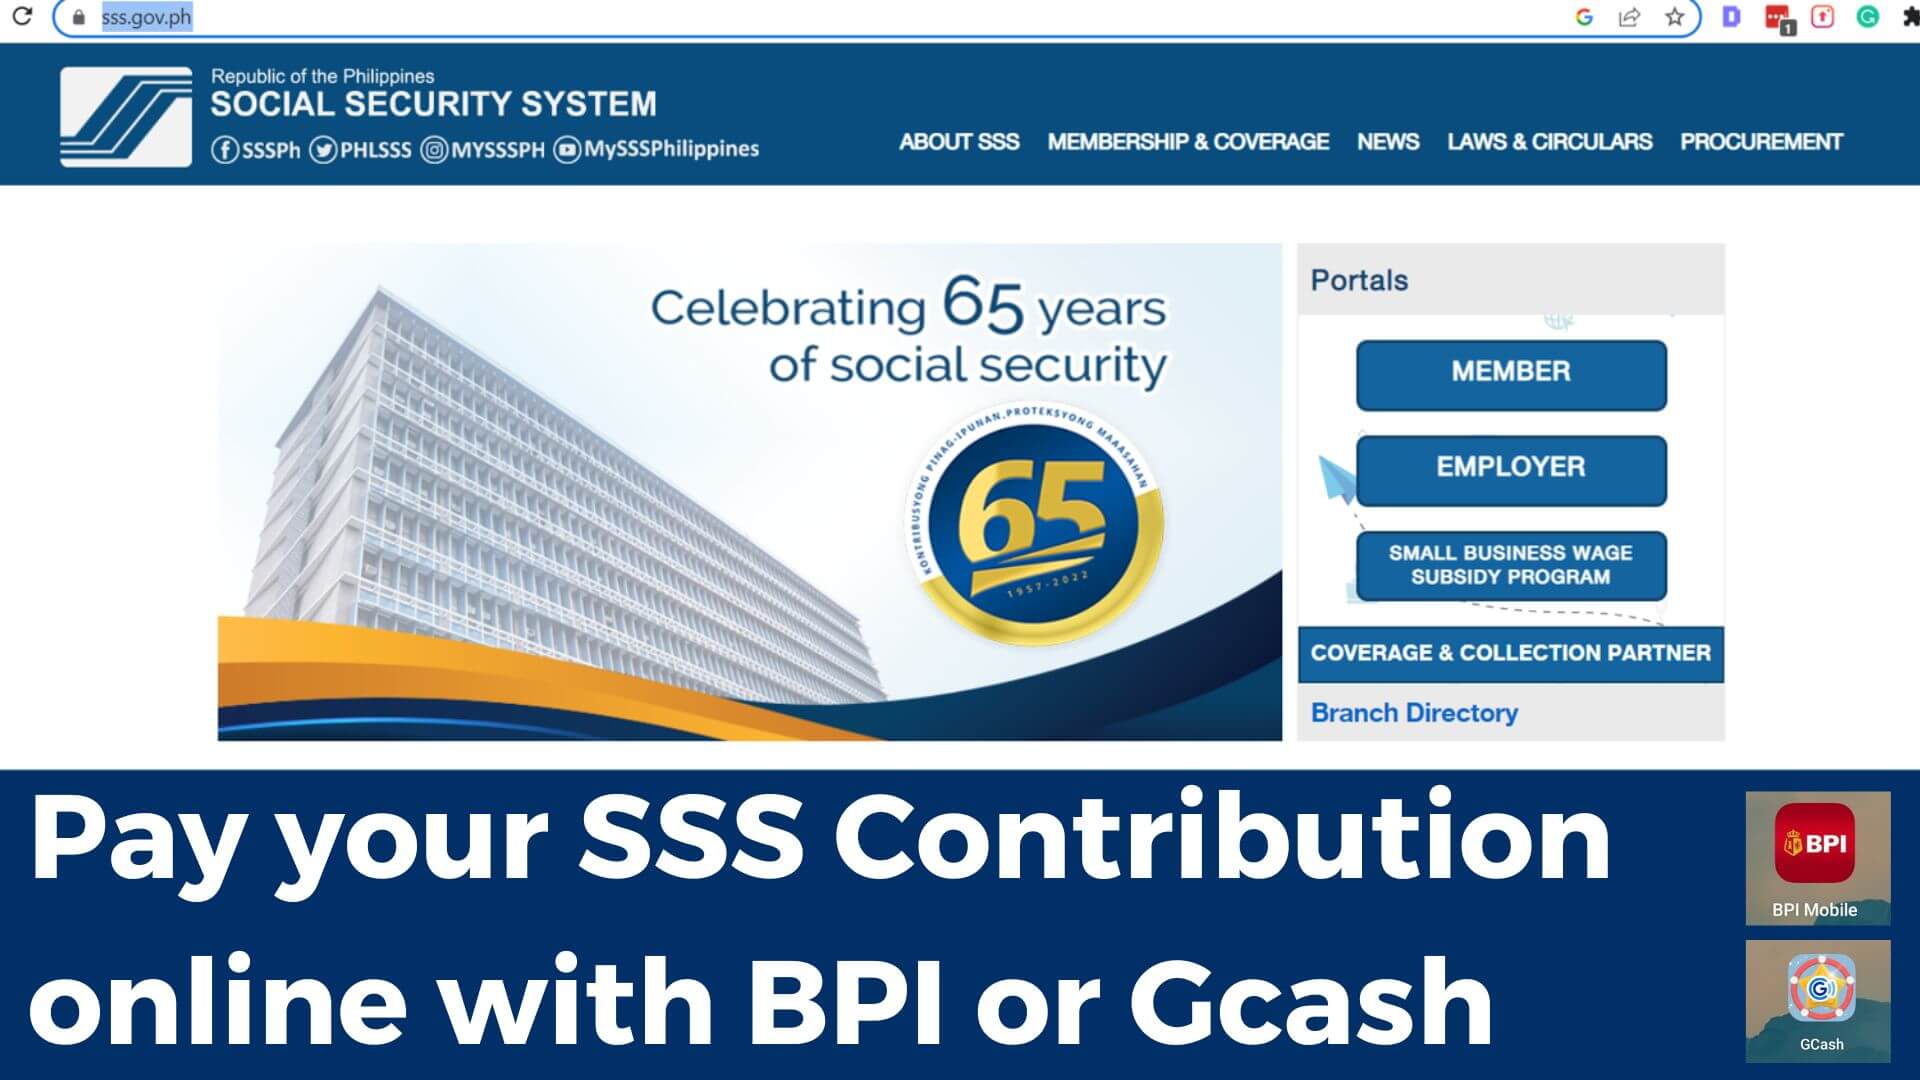 SSS official website with BPI and Gcash mobile applications